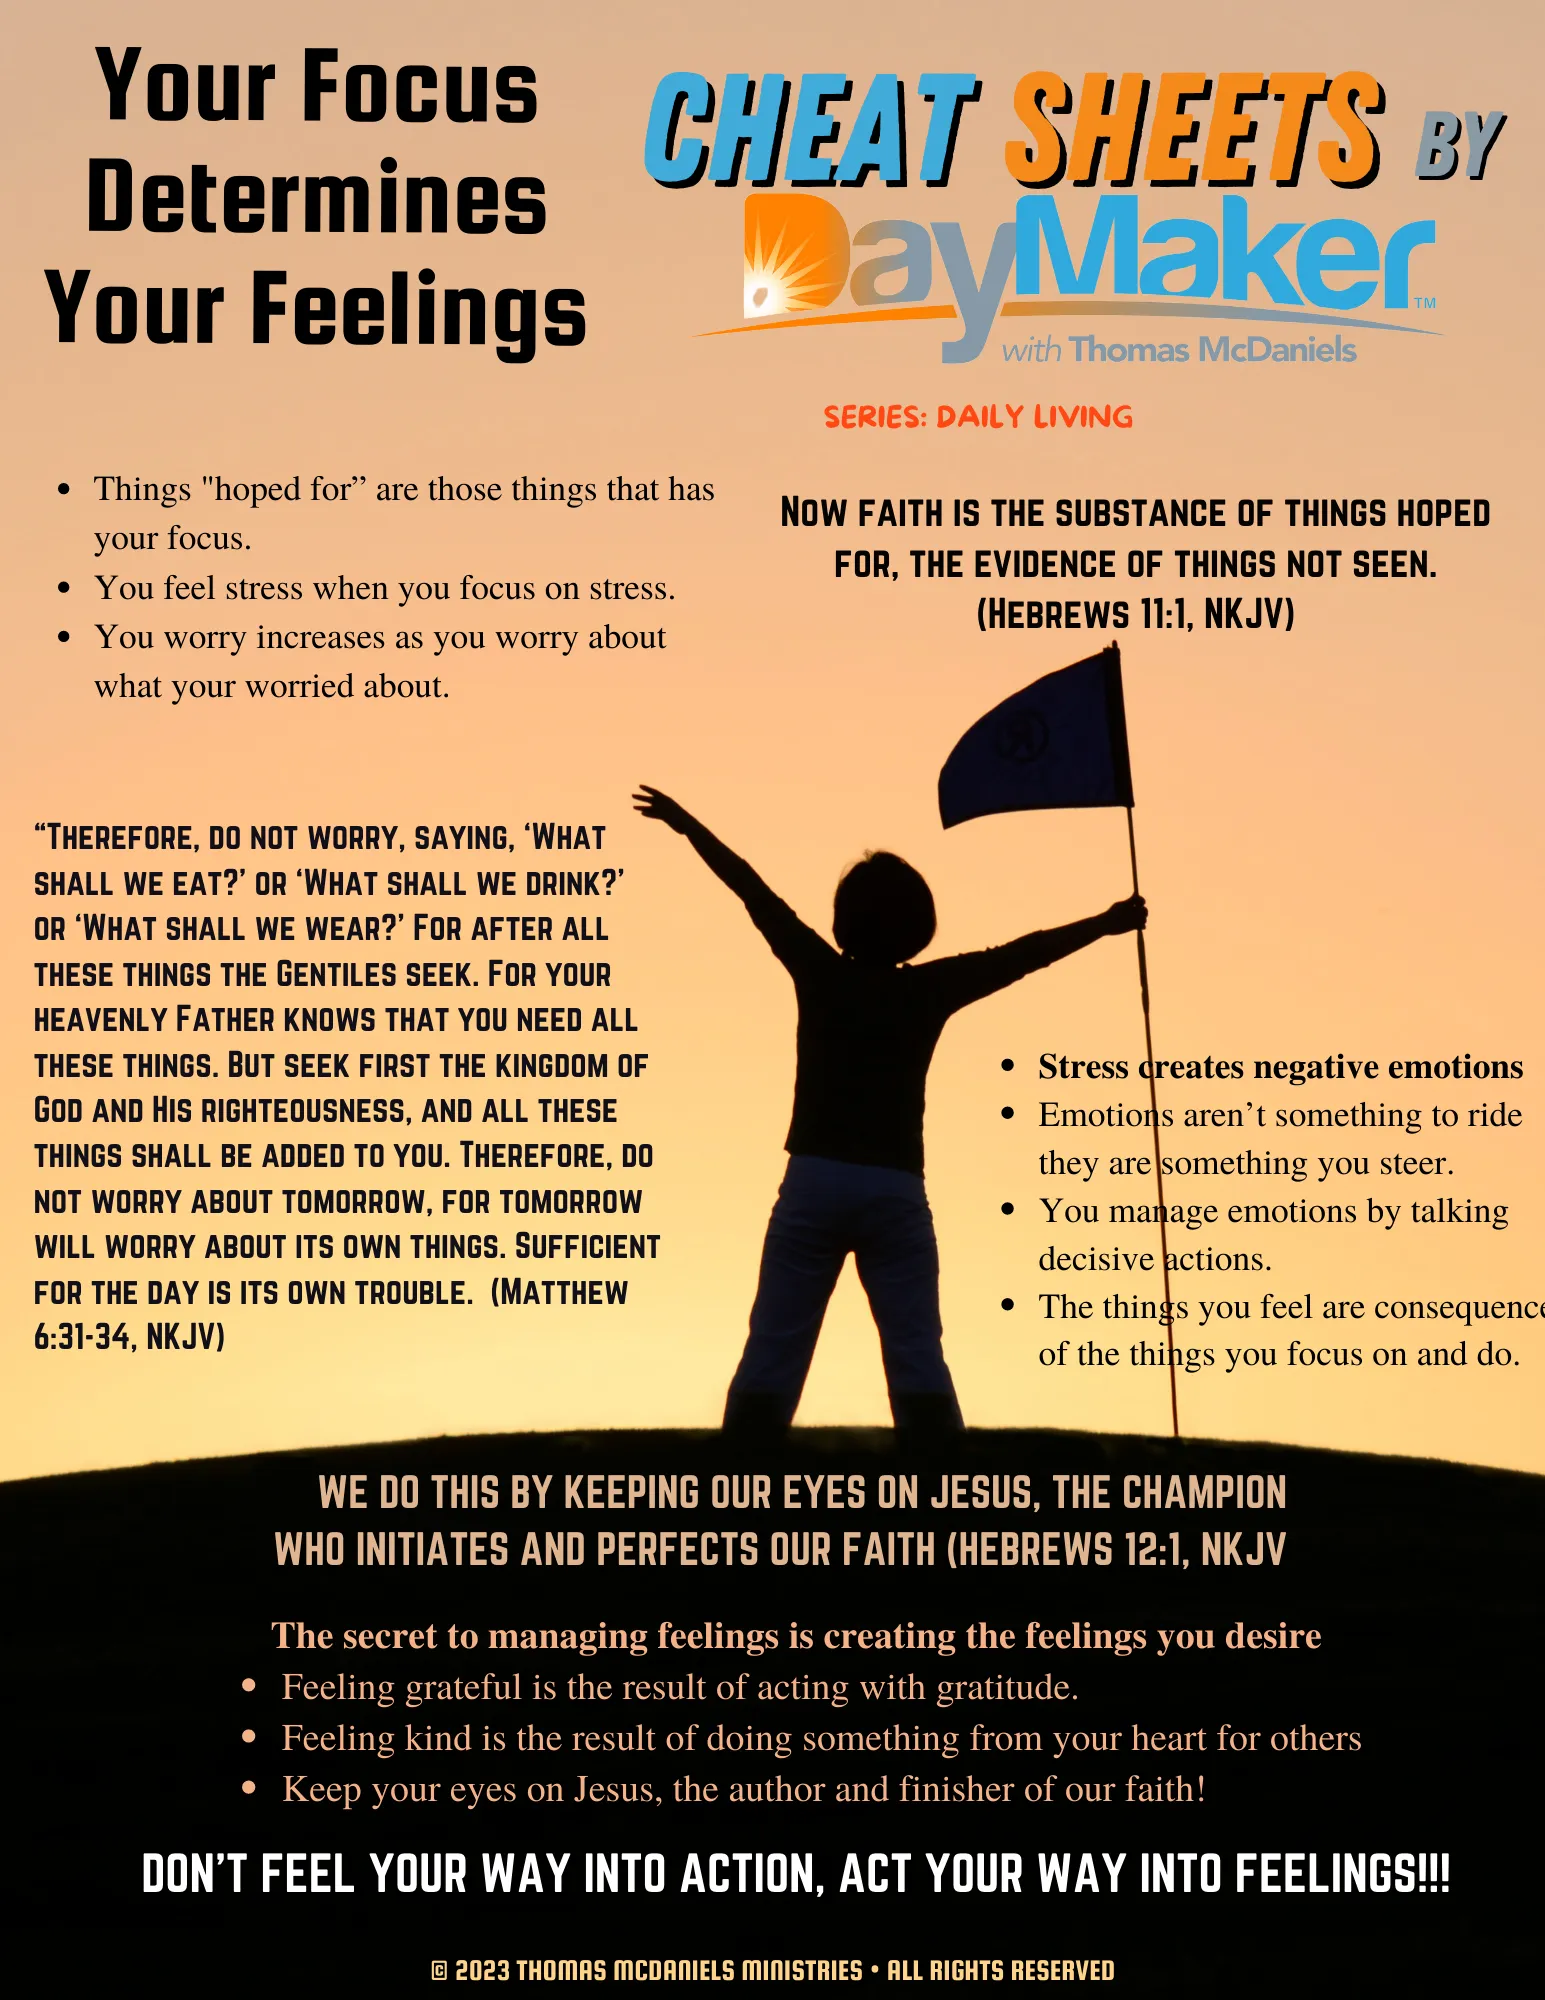 Cheat Sheets By DayMaker ~Your Focus Determines Your Feelings